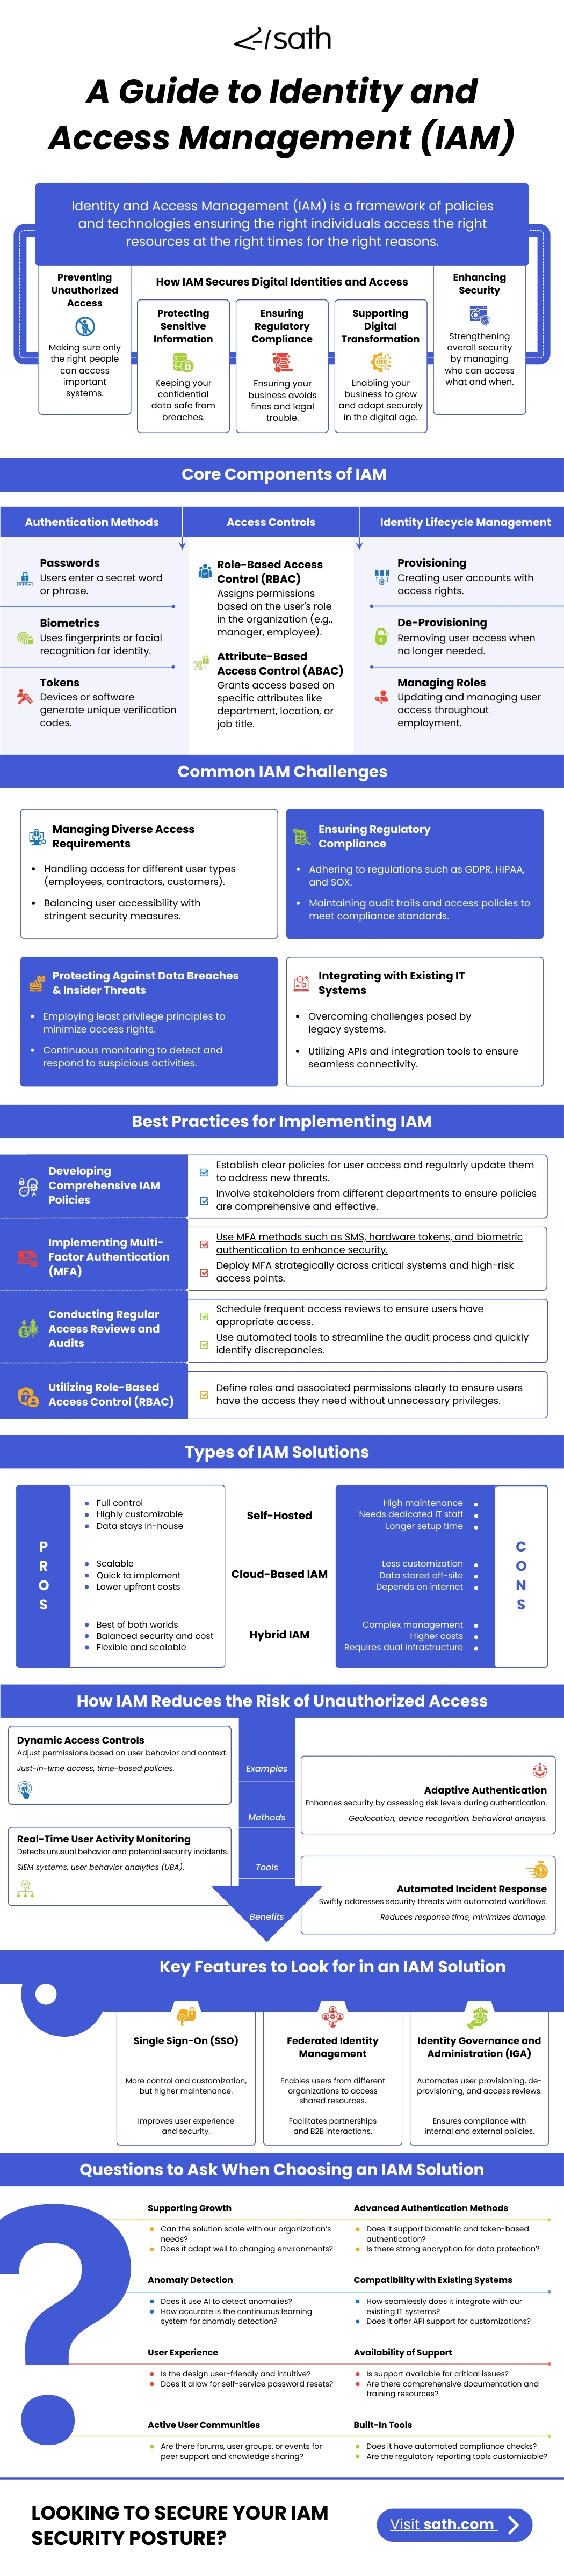 High Res- Sath Infographic - A Guide to Identity and Access Management (IAM) (1).jpg